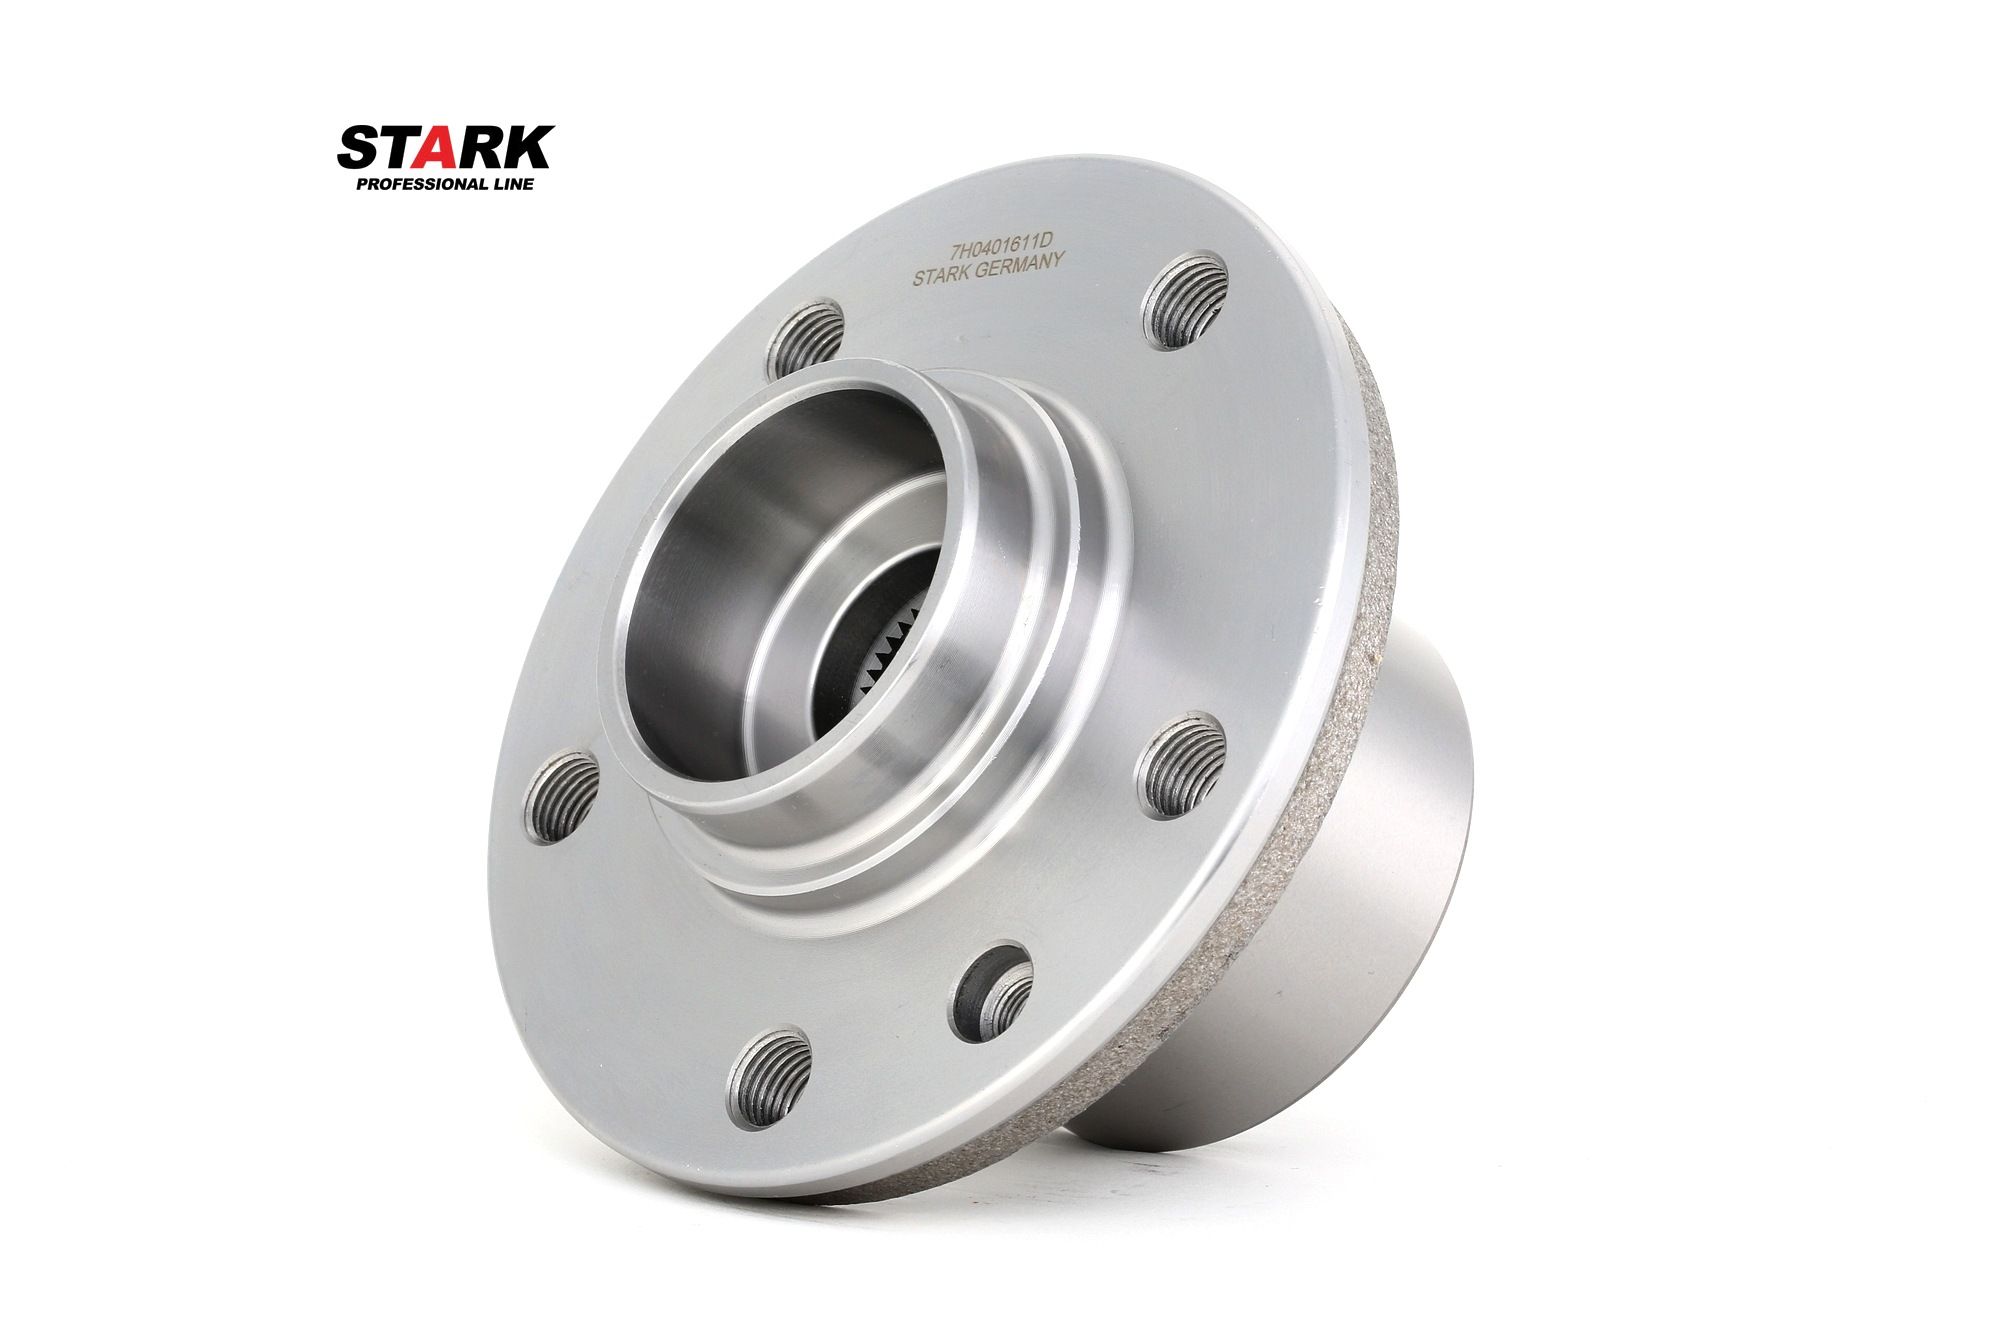 SKWB-0180128 STARK Wheel hub assembly JAGUAR with attachment material, with integrated wheel bearing, with wheel hub, 85 mm, Ball Bearing, Tapered Roller Bearing